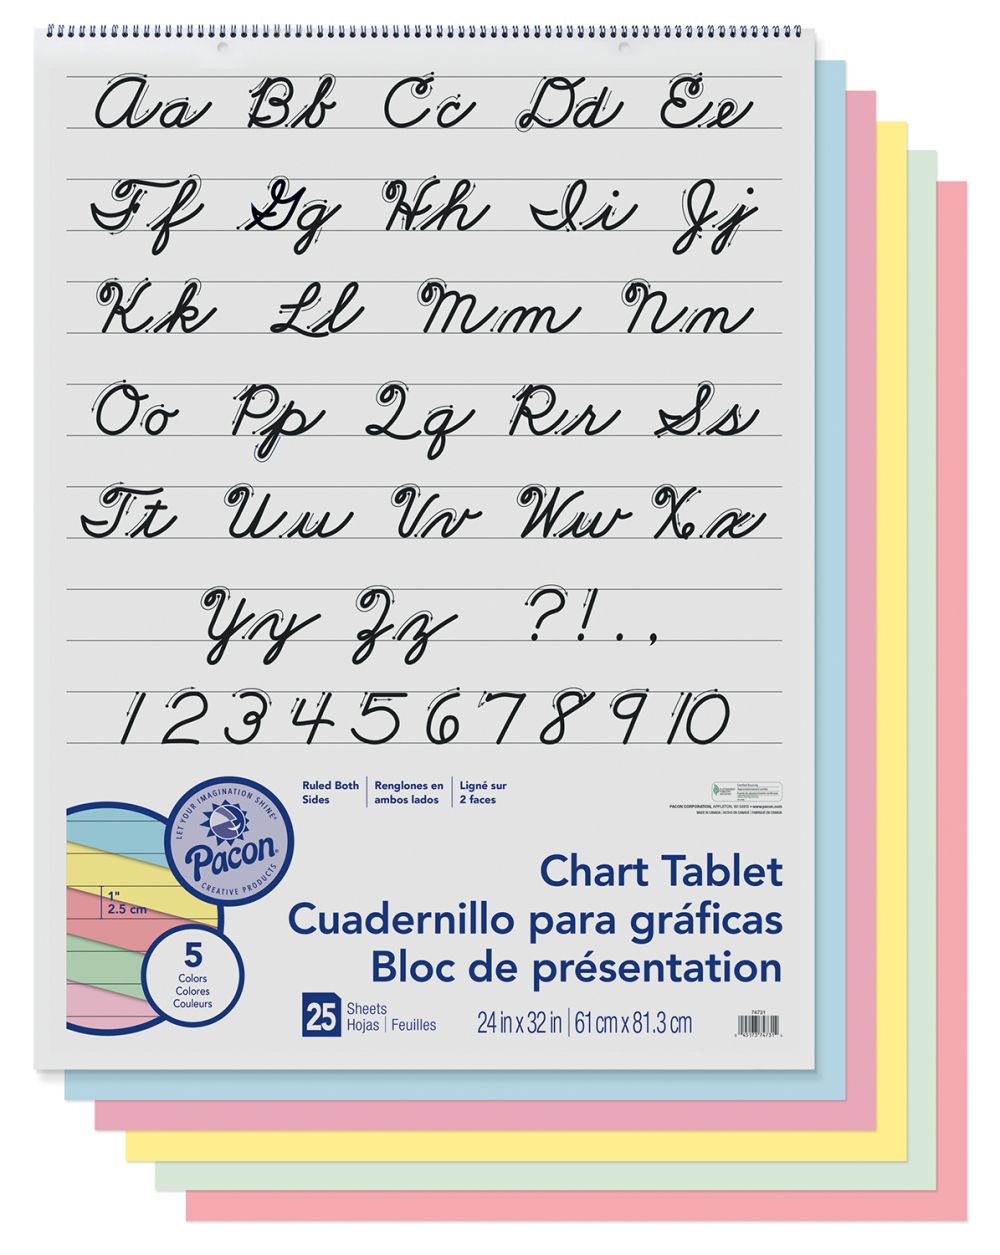 PAC74520 Pacon Chart Tablets 